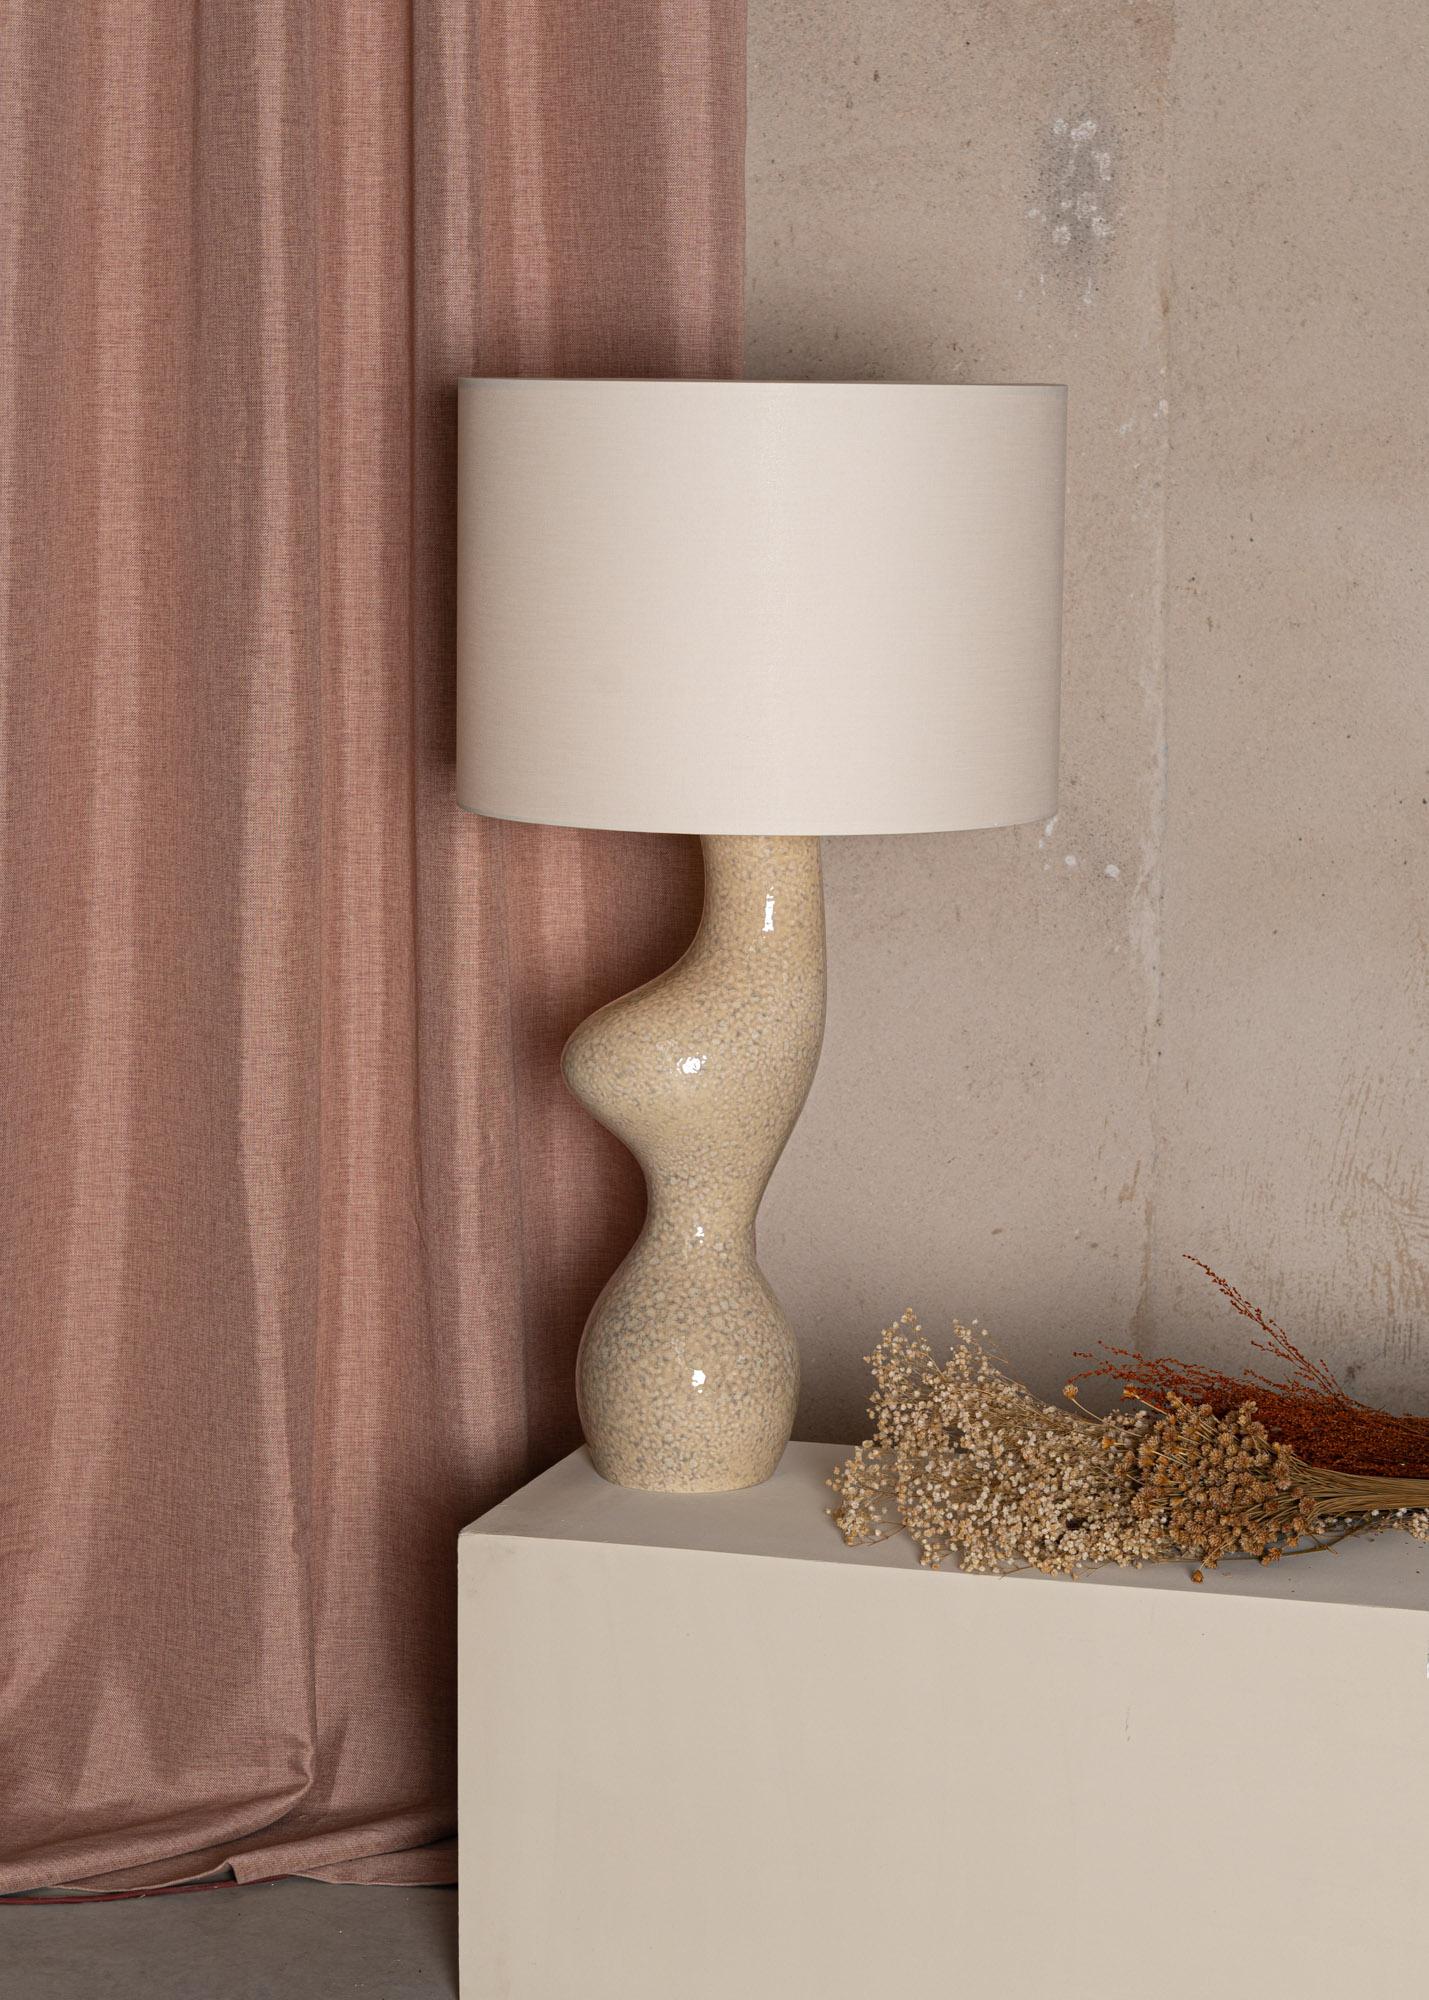 Beige Ceramic Venuso Table Lamp by Simone & Marcel
Dimensions: Ø 50 x H 78 cm.
Materials: Cotton and ceramic.

Also available in different ceramic options. Custom options available on request. Please contact us. 

All our lamps can be wired